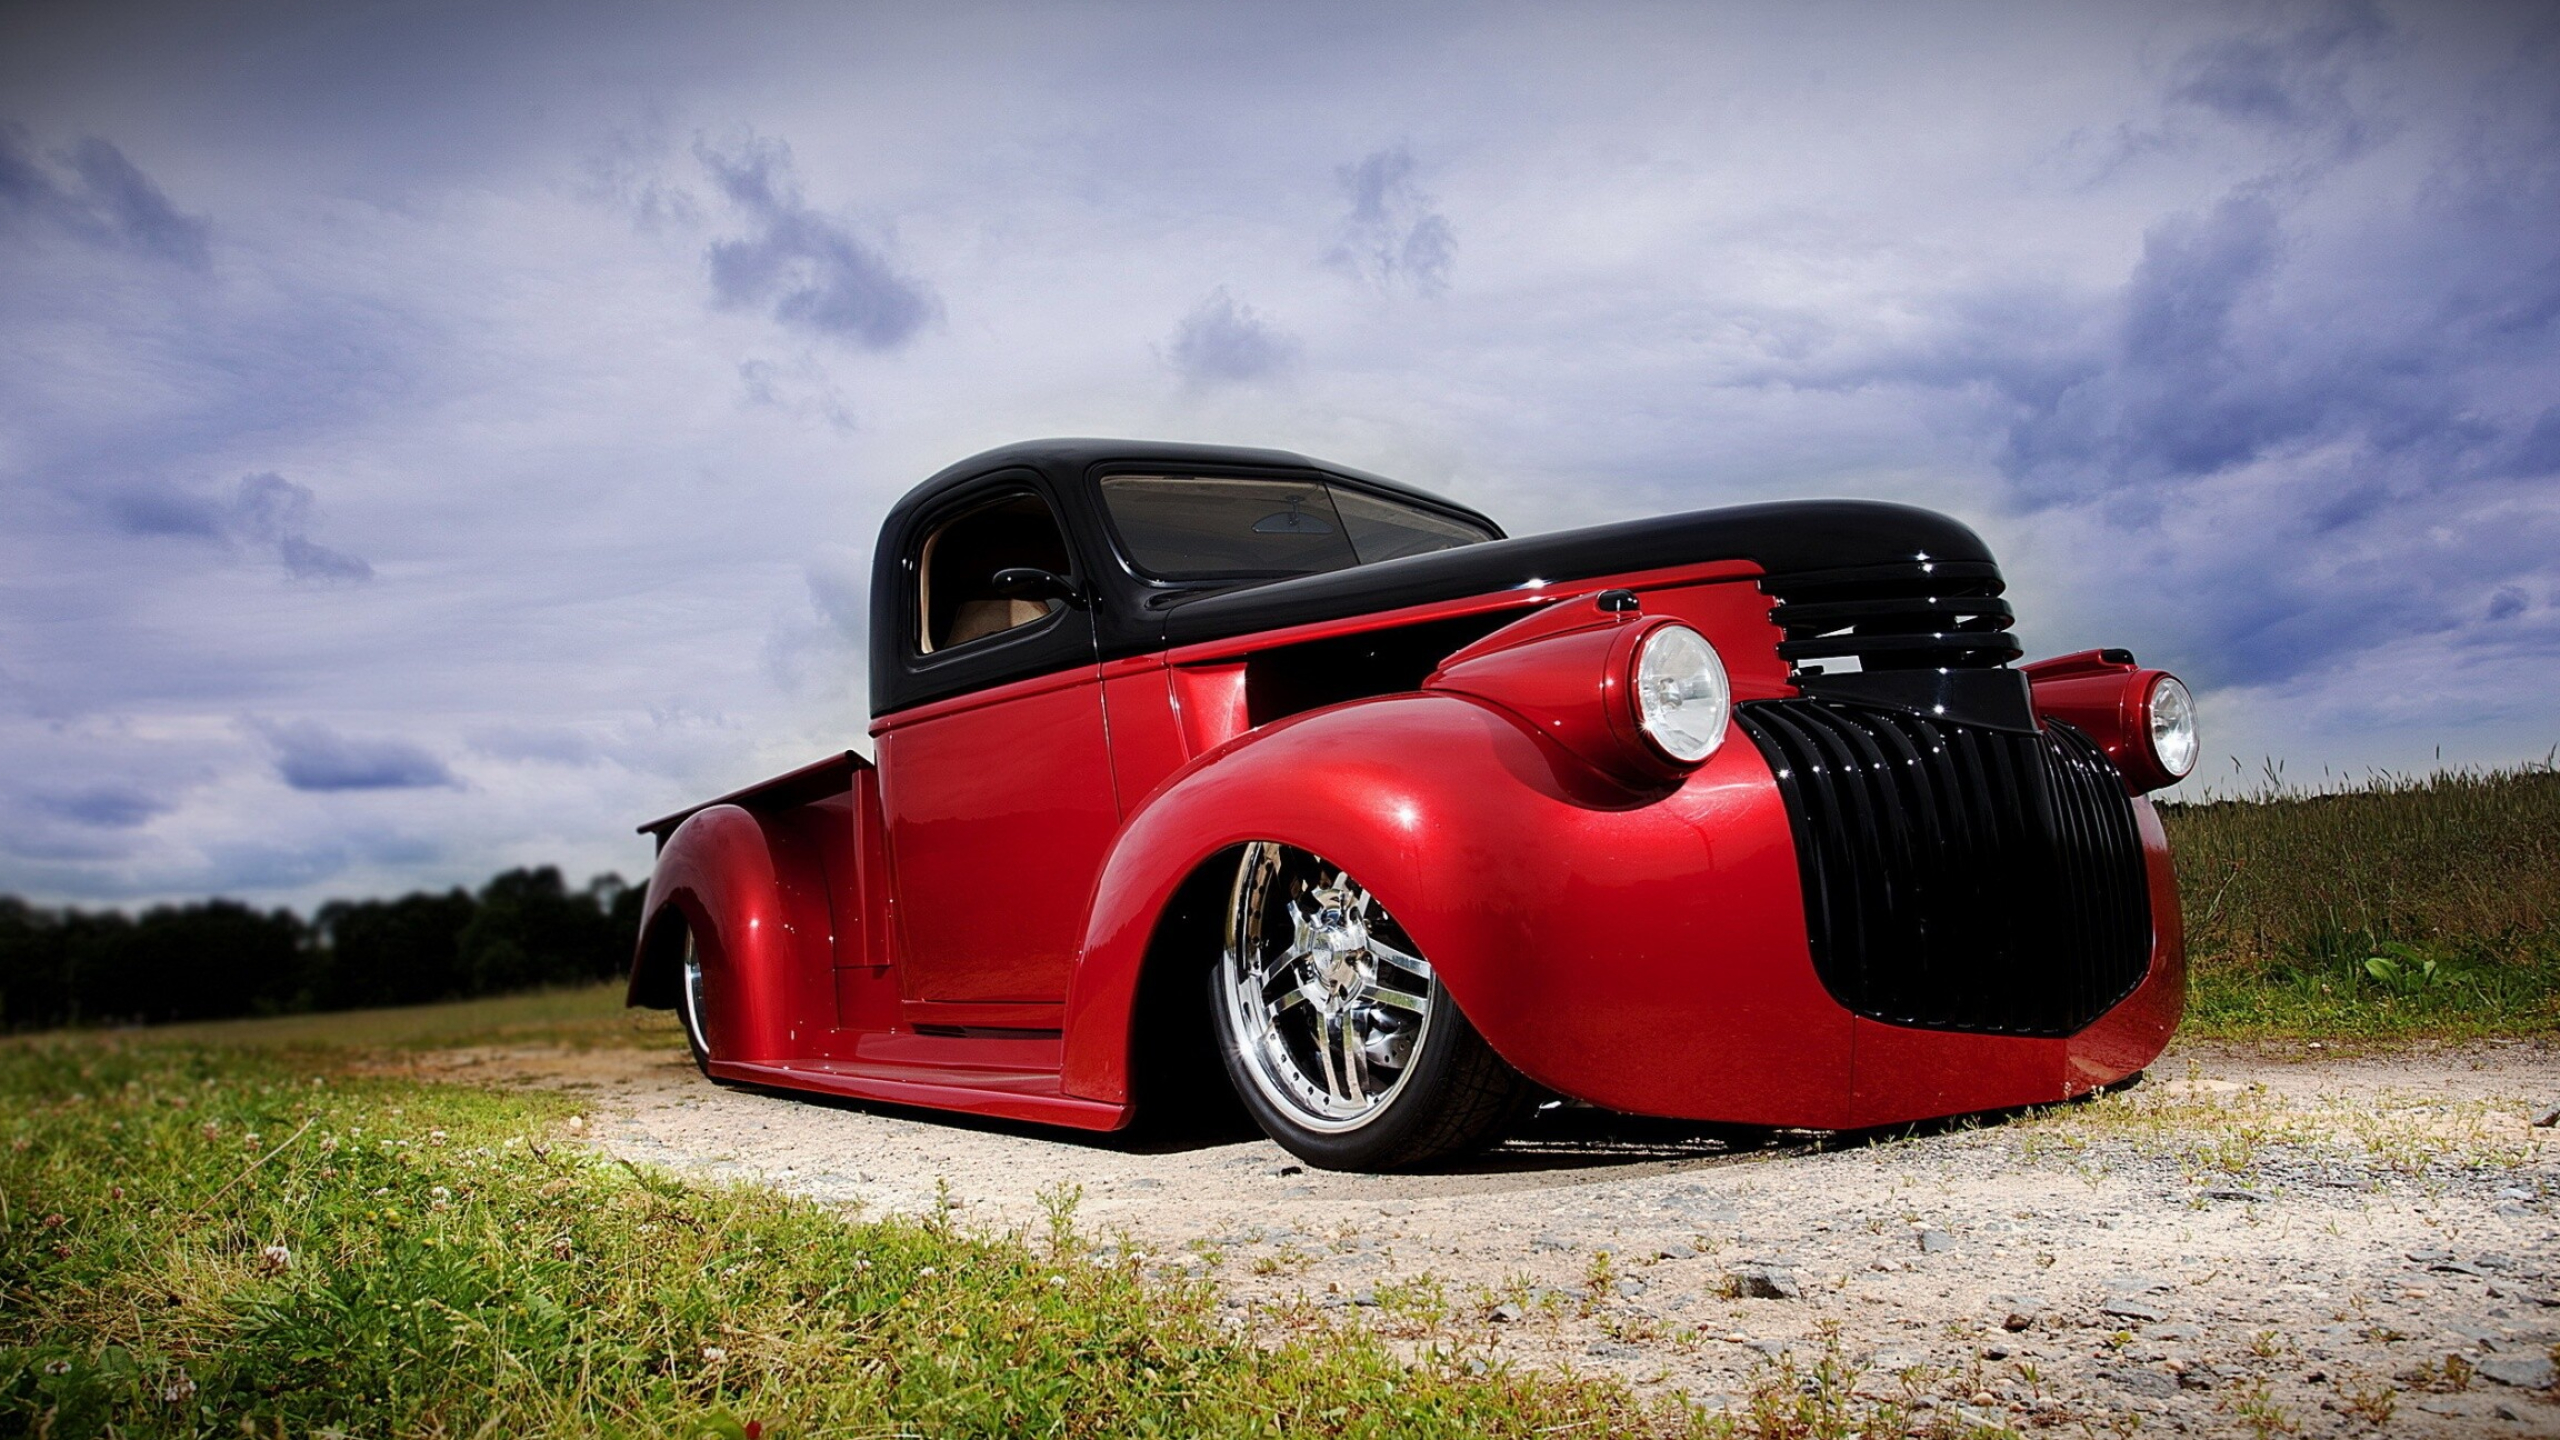 Hot Rod: A modified vehicle, Chevy. 2560x1440 HD Background.